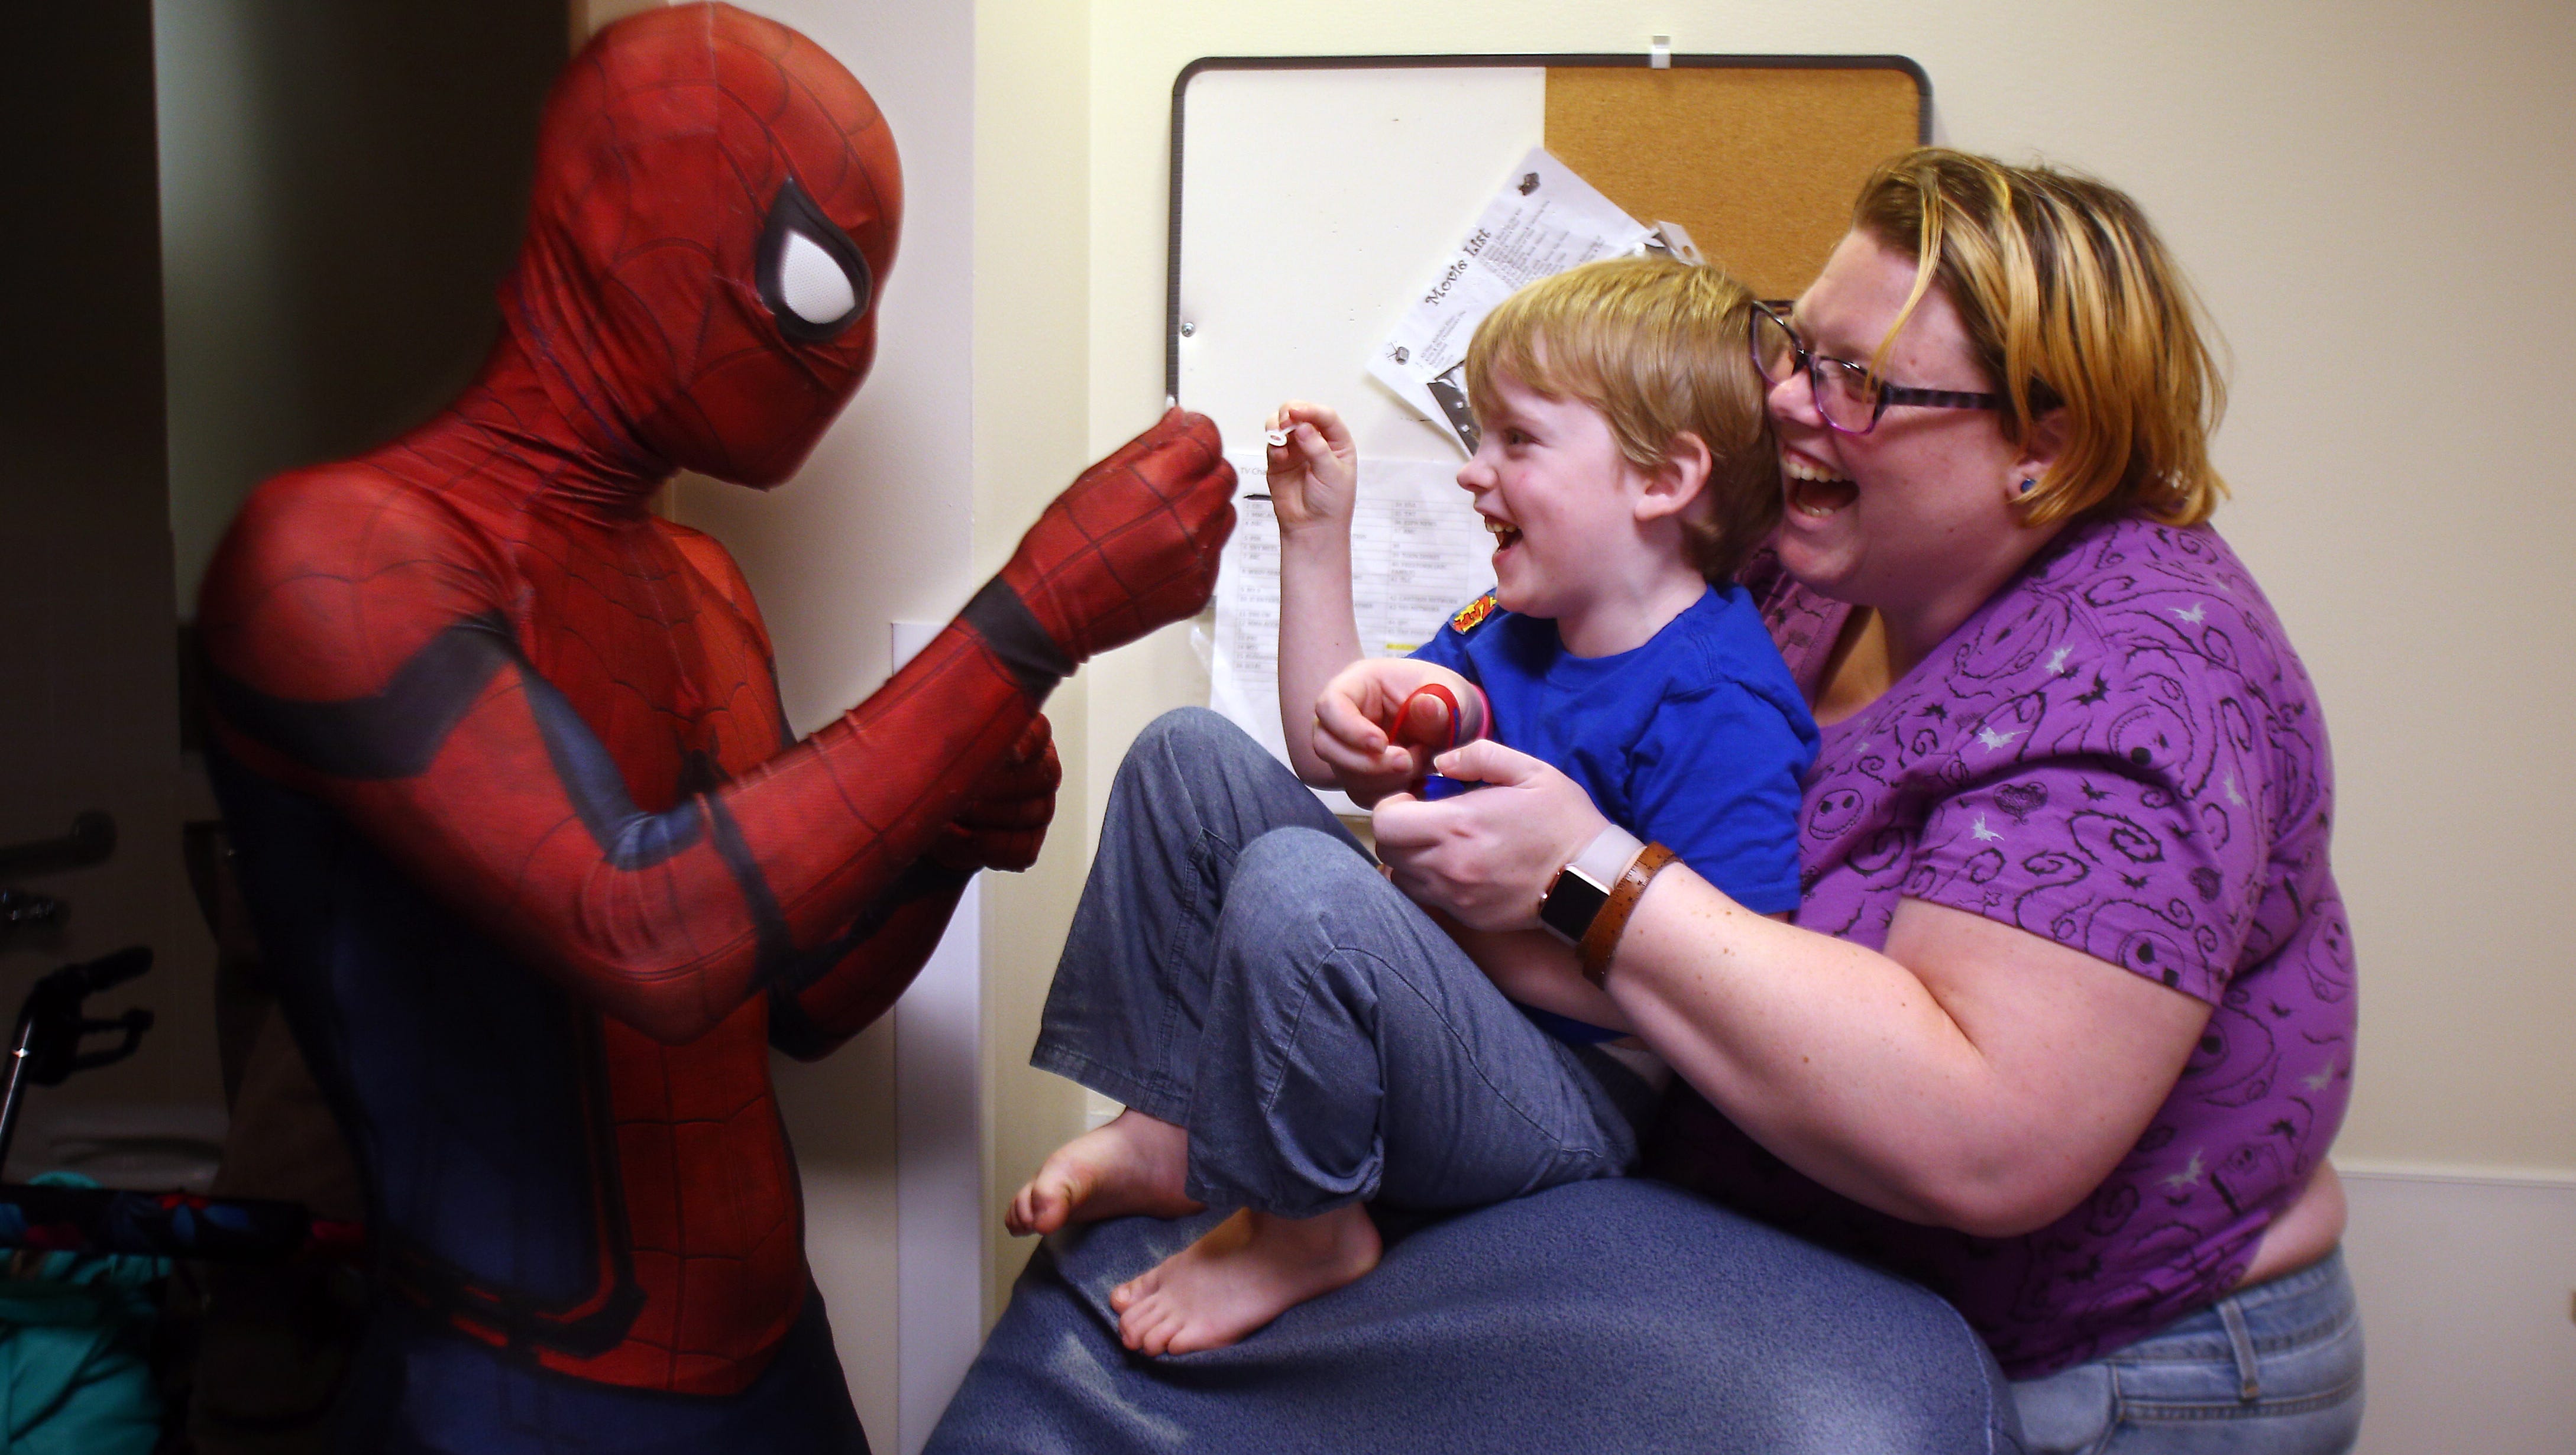 Superheroes fly to Morristown children's hospital